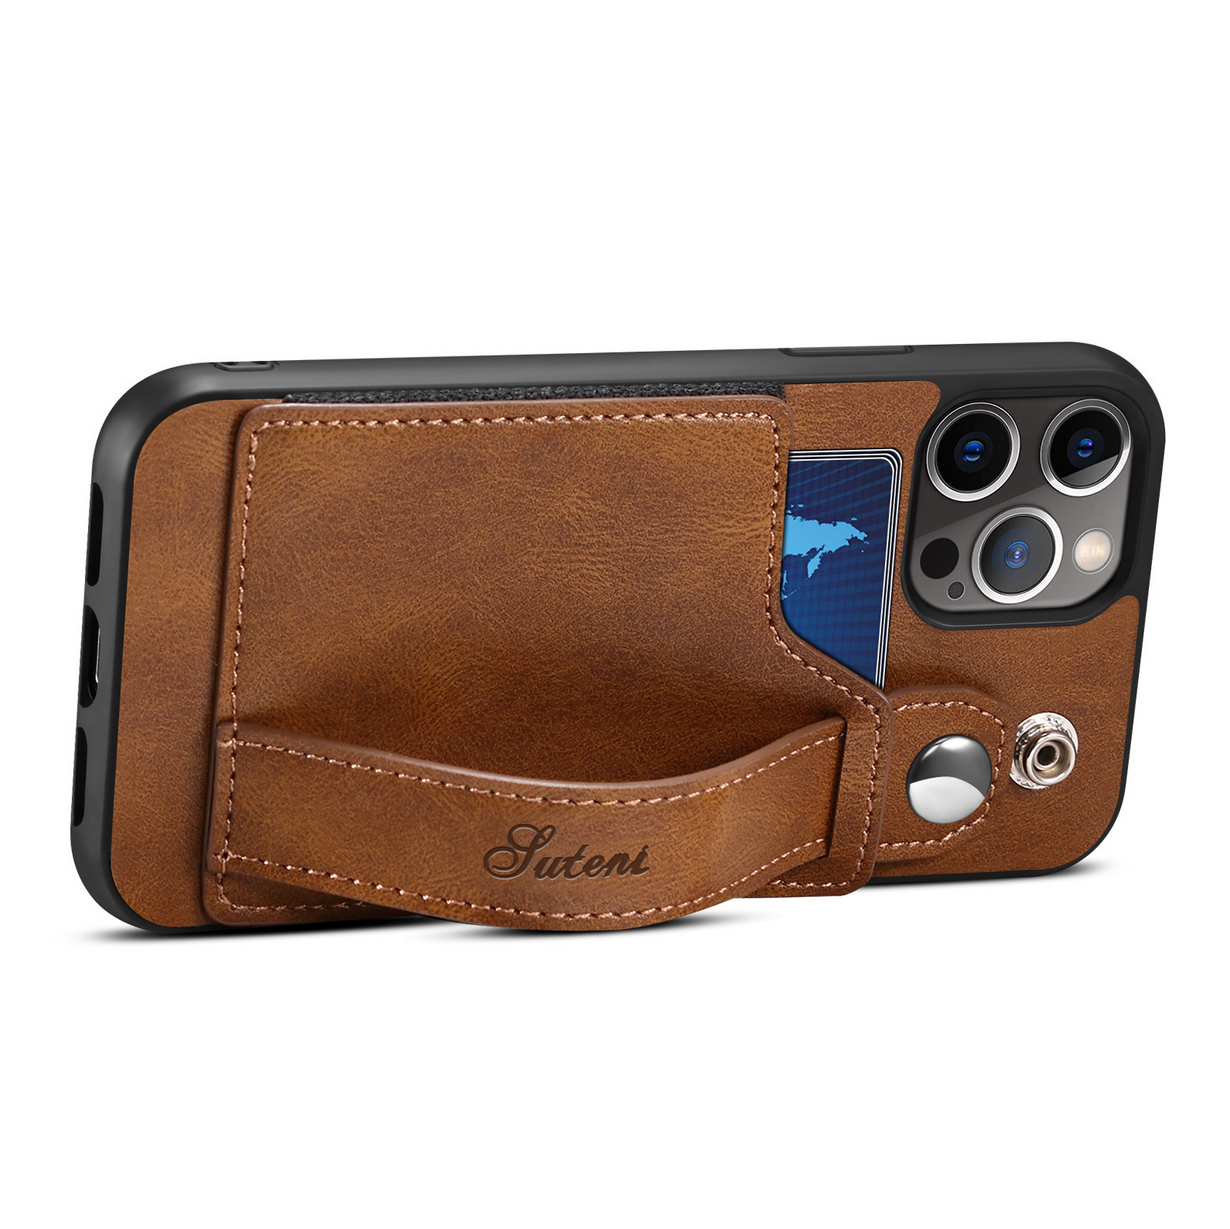 iPhone Wallet Case With Strap - Tinsico